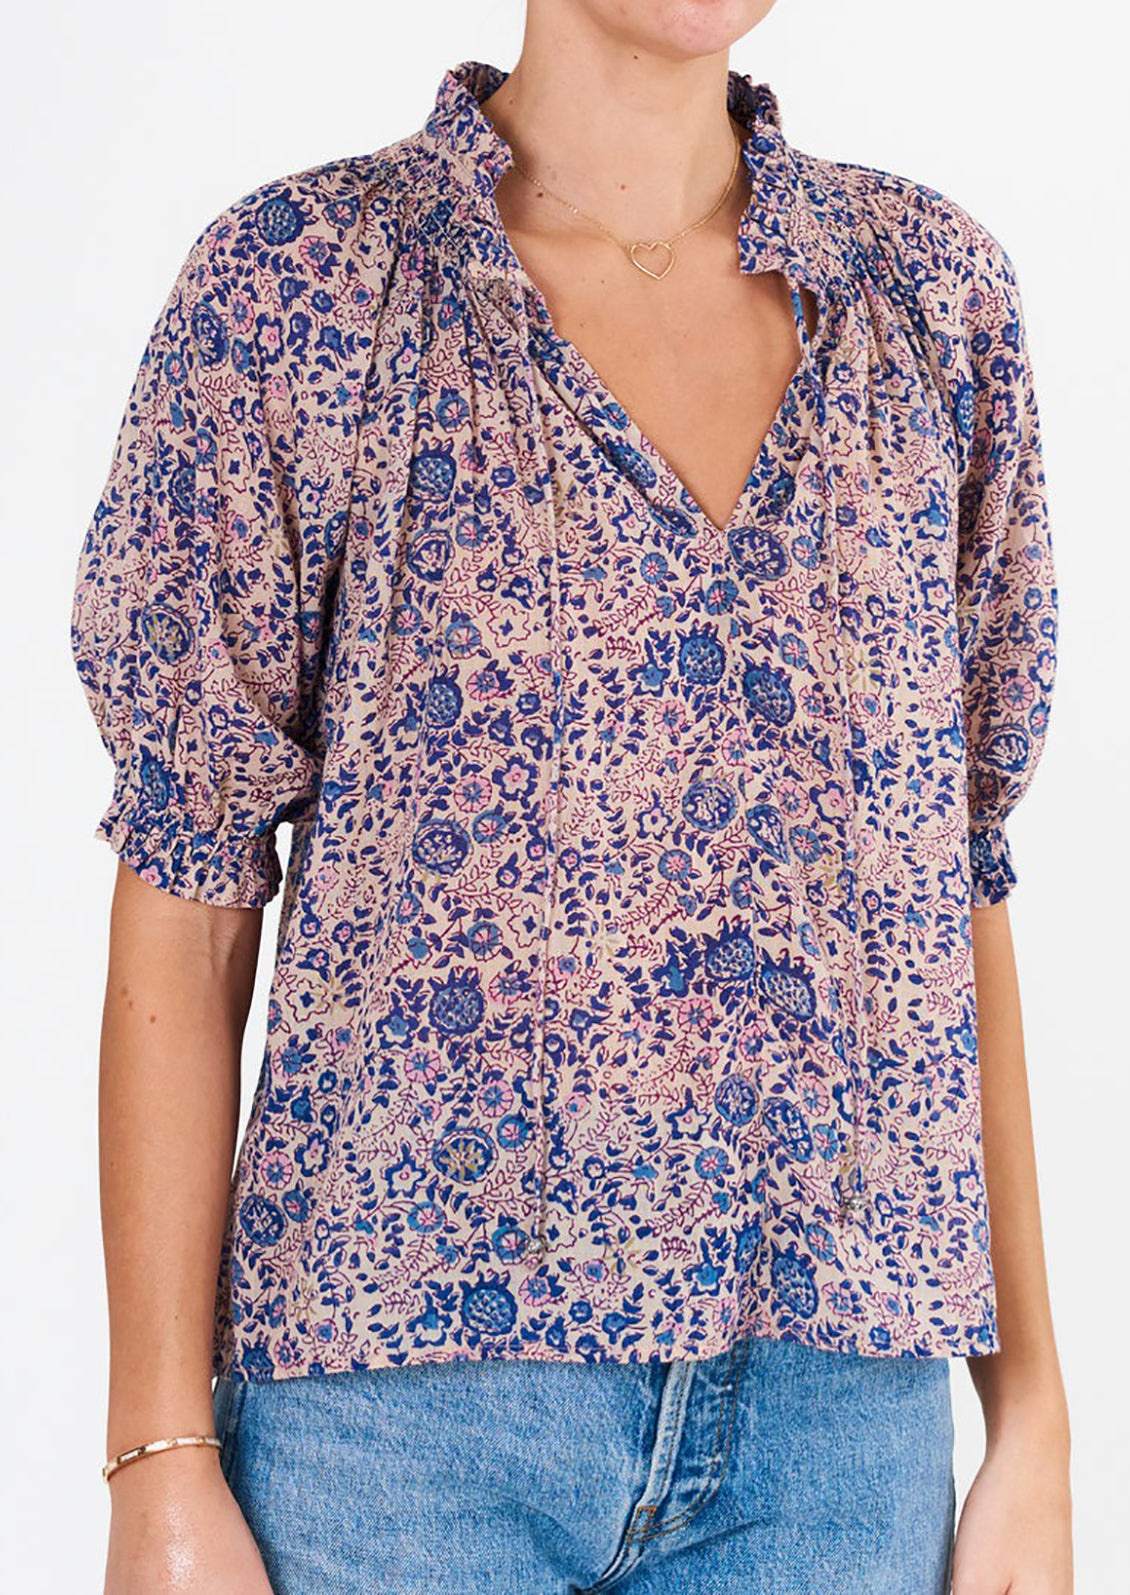 A woman wearing a floral block printed shirt with short sleeves.